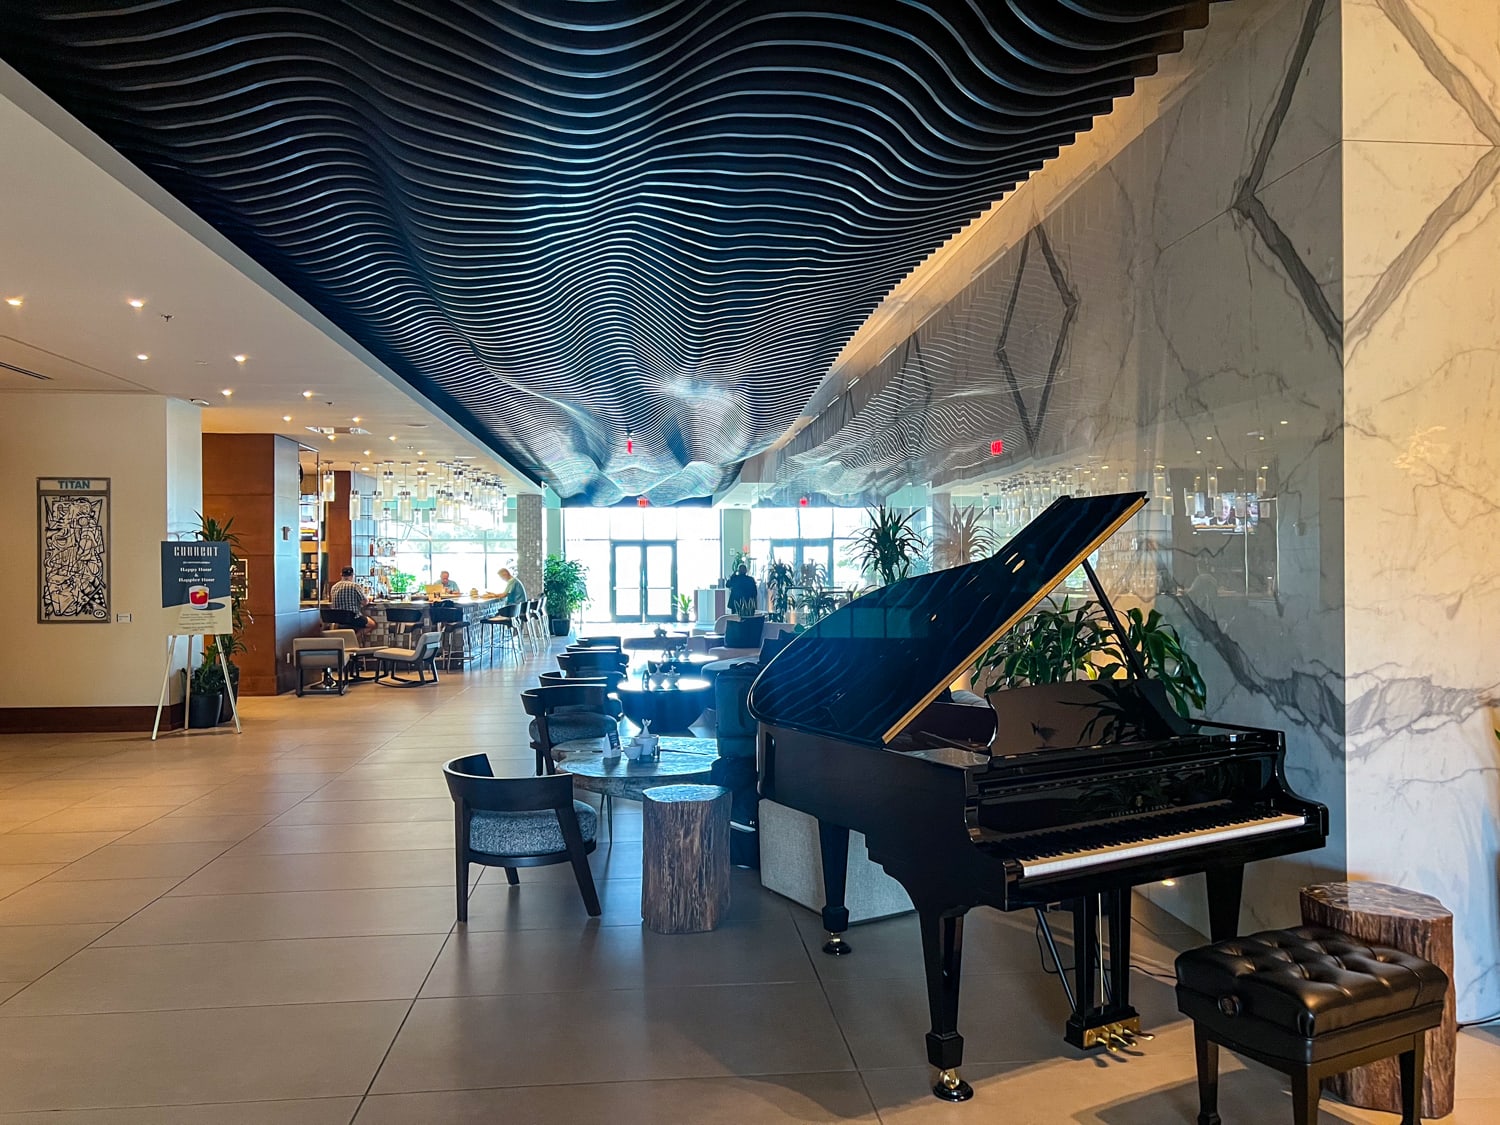 Lobby of The CURRENT Hotel with player piano